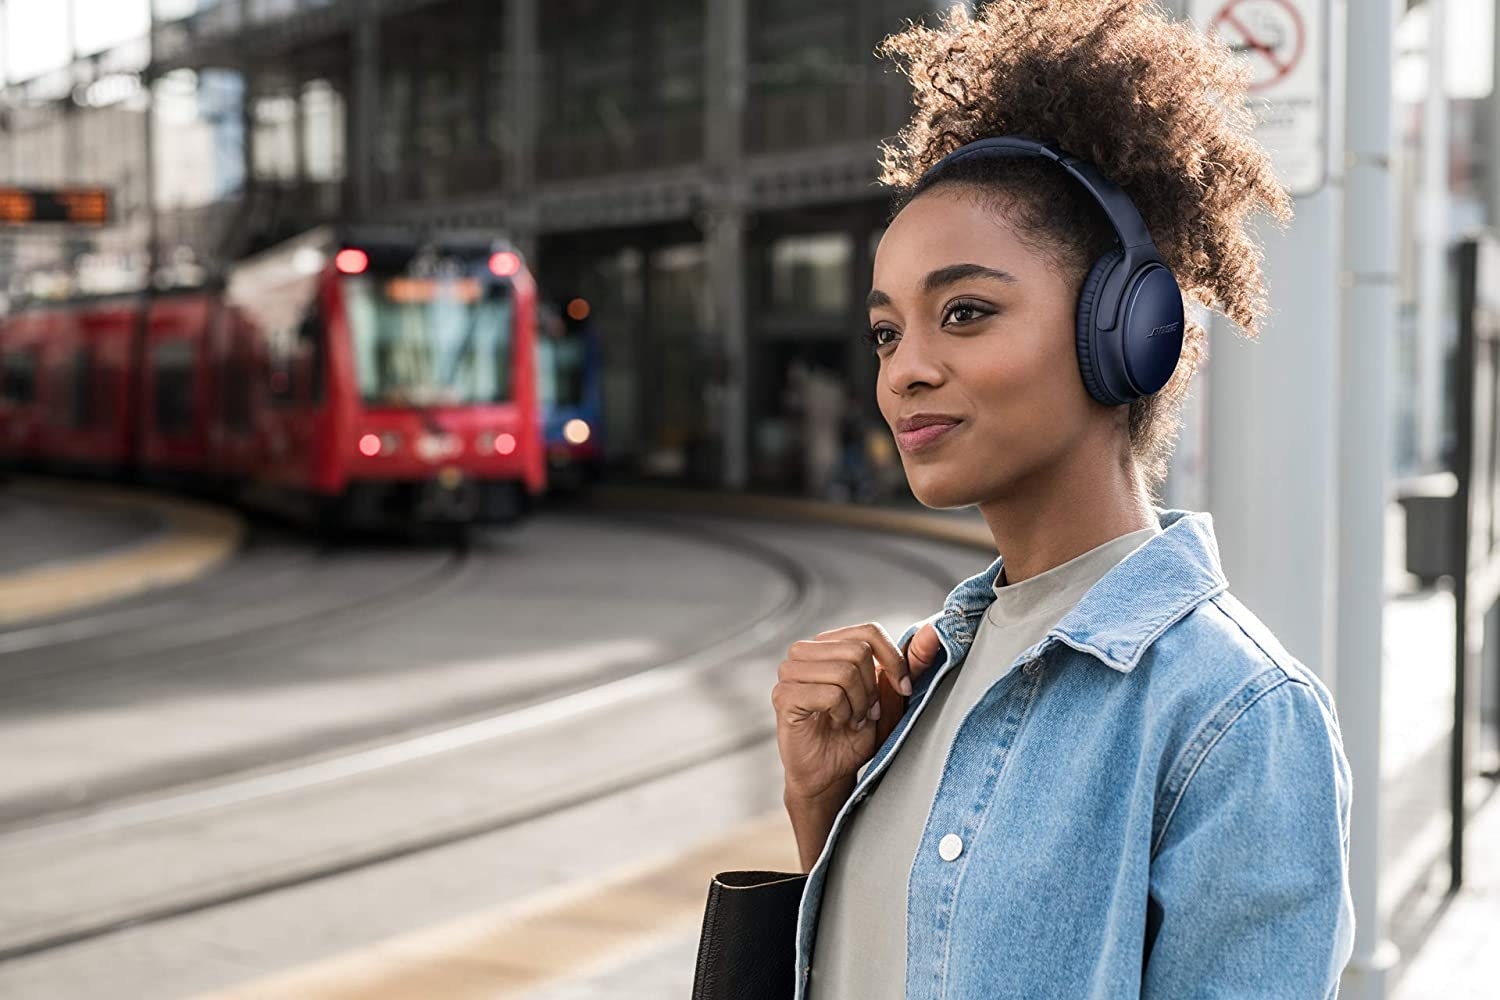 A smiling person waiting for the streetcar while wearing the headphones